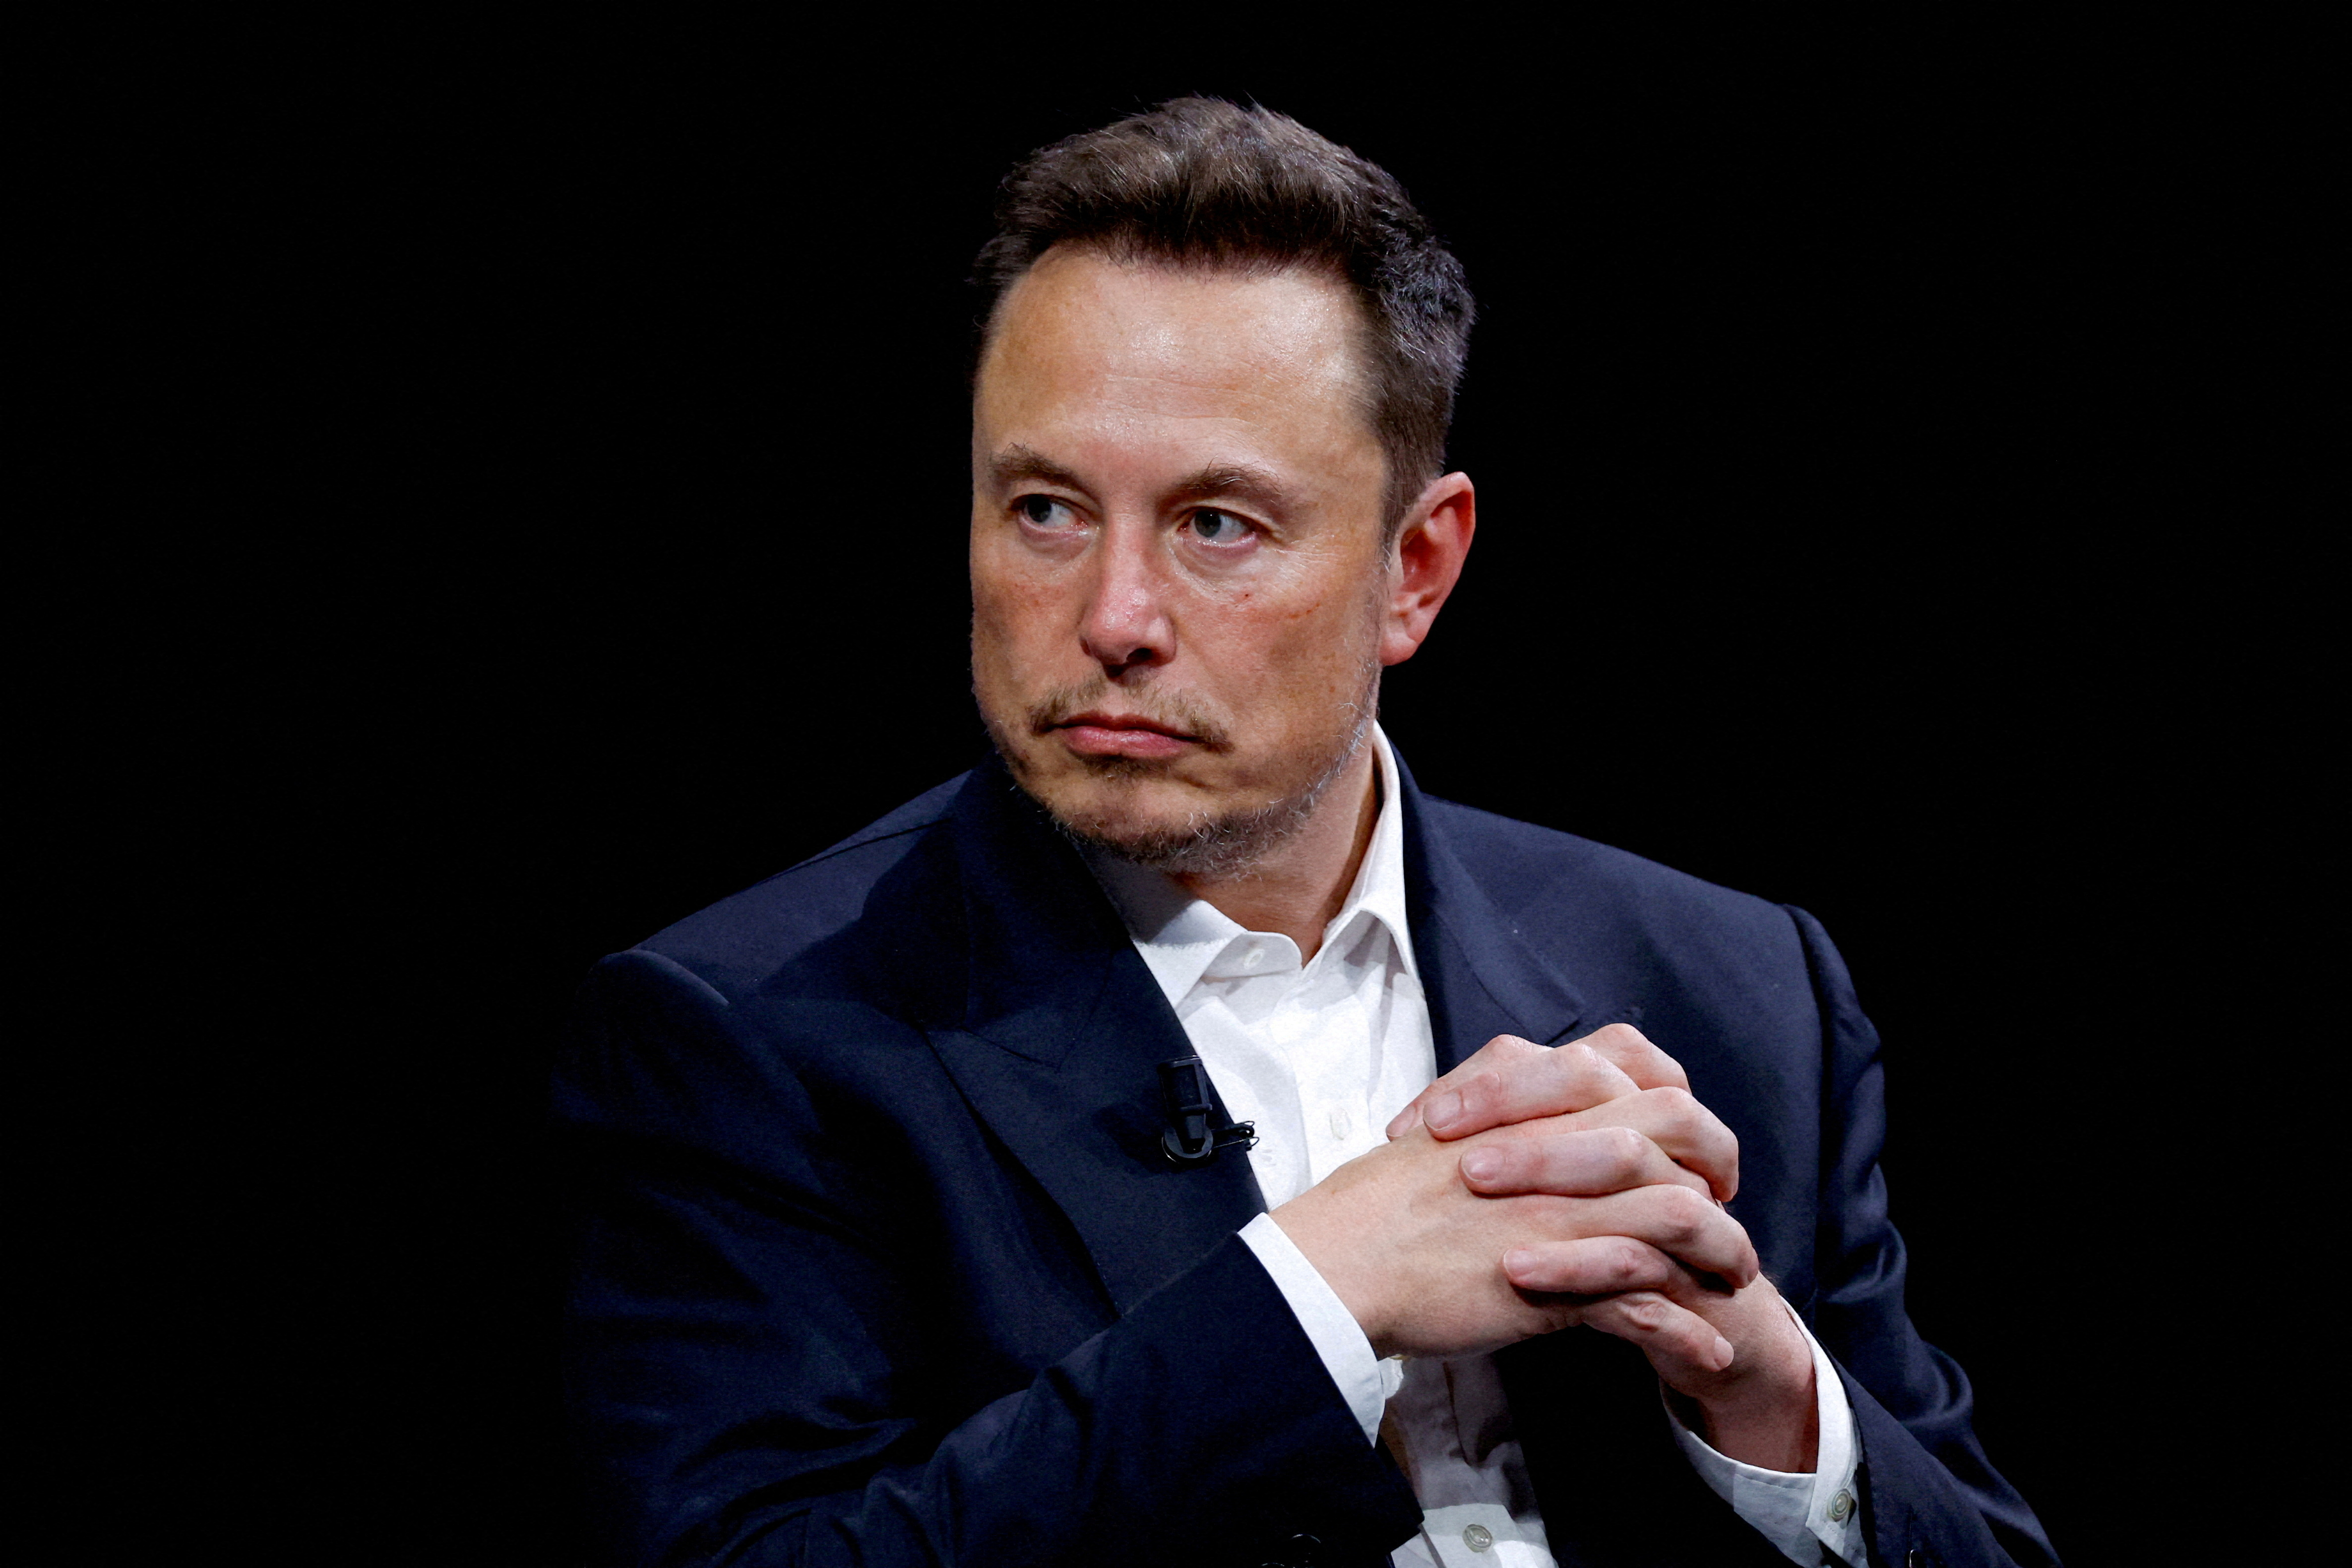 Voiding Elon Musk’s $56 billion Tesla pay plan is a 'wake-up call' for directors at all companies